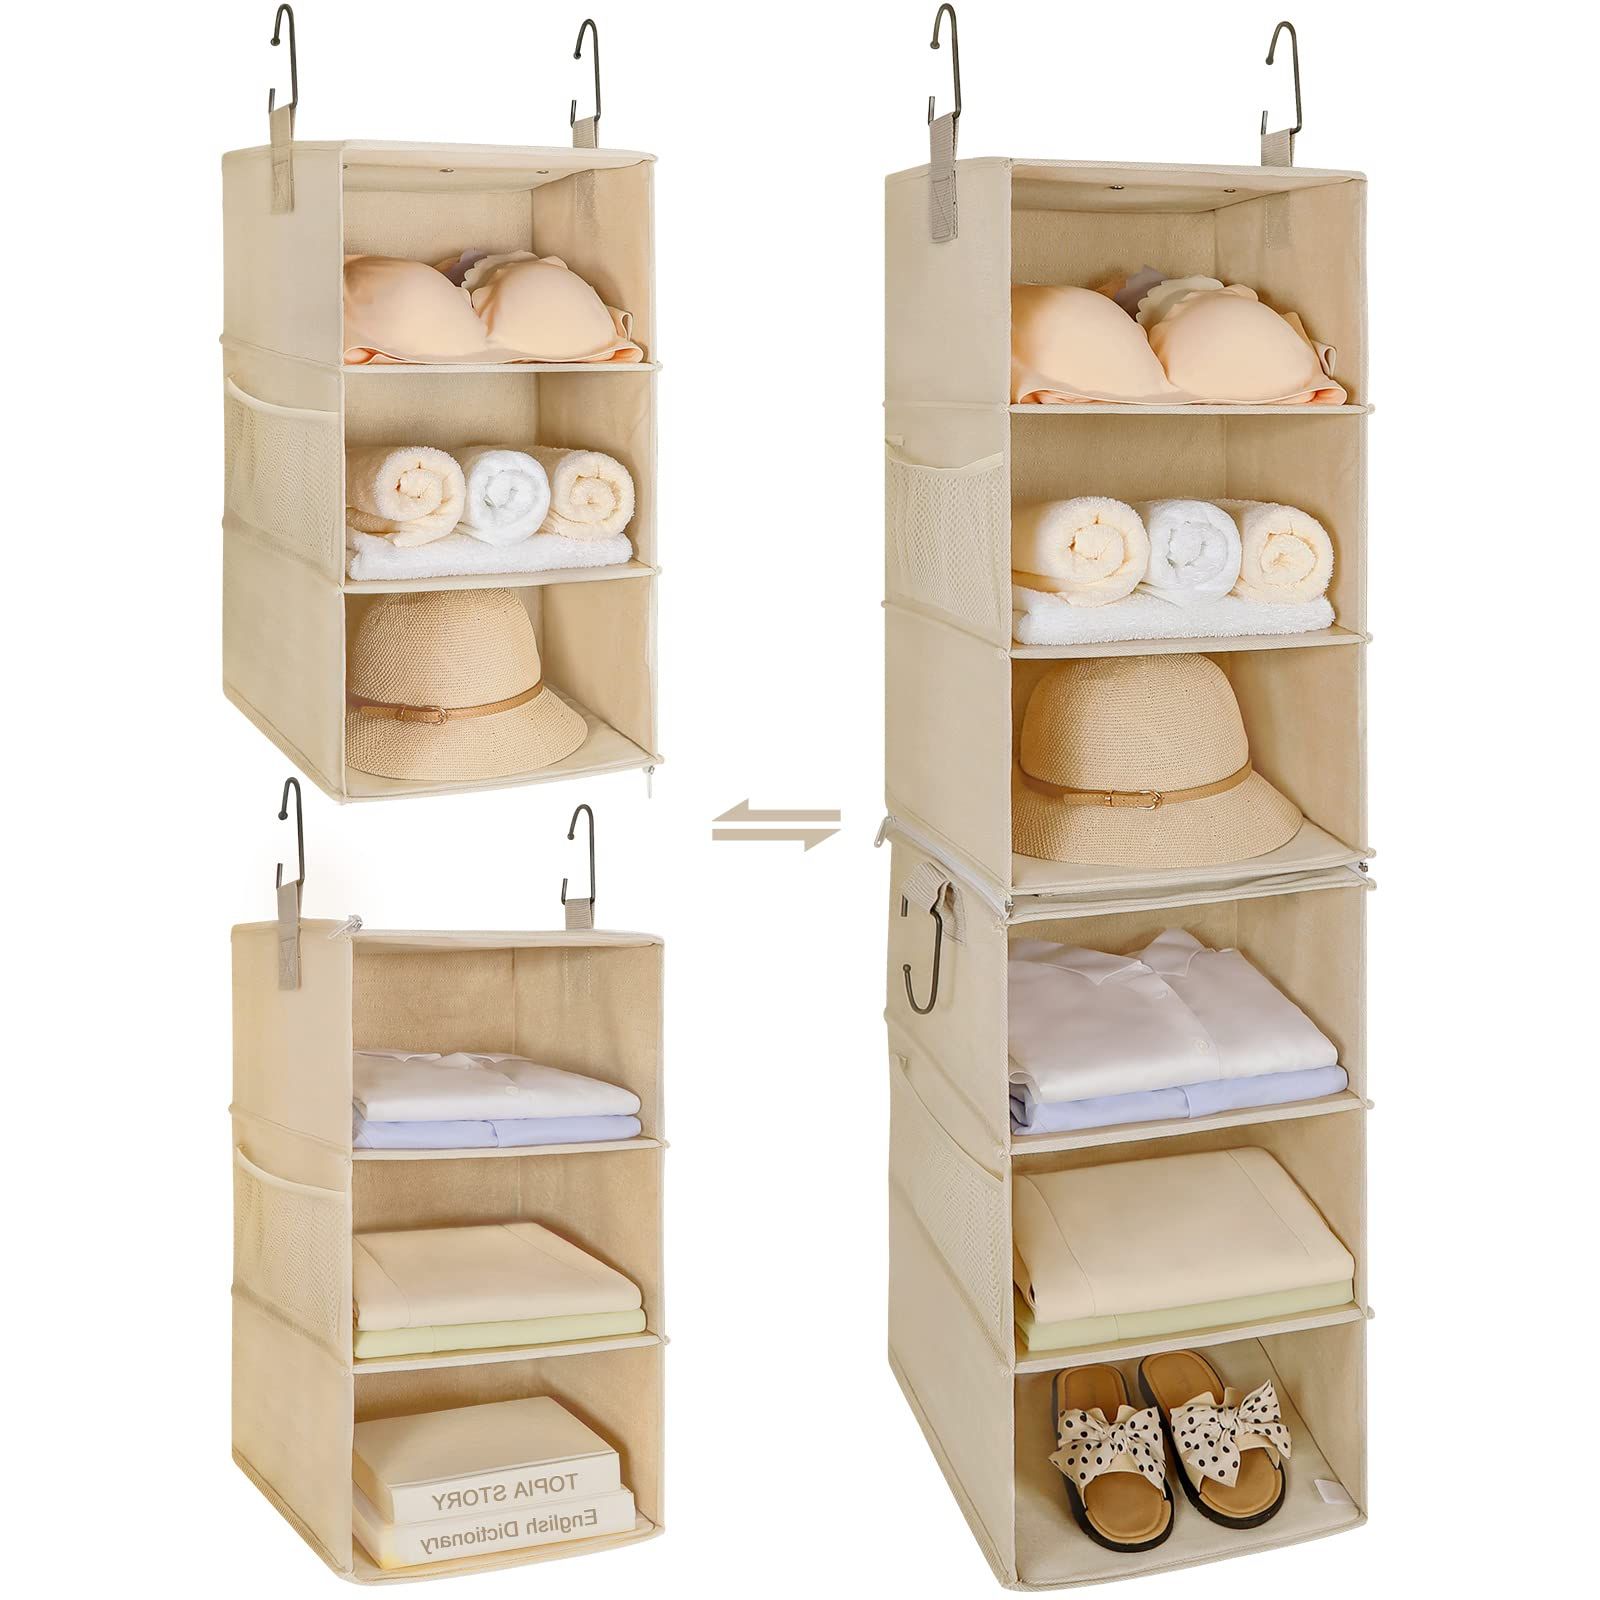 Recent 2 Separable Wardrobes Within Amazon: Topia Home 6 Shelf Hanging Closet Organizer, Two Separable  3 Tier Thickened Fabric Hanging Closet Shelves With Mesh Pockets,  Collapsible Closet Organizers And Storage Organization, Beige : Home &  Kitchen (View 6 of 10)